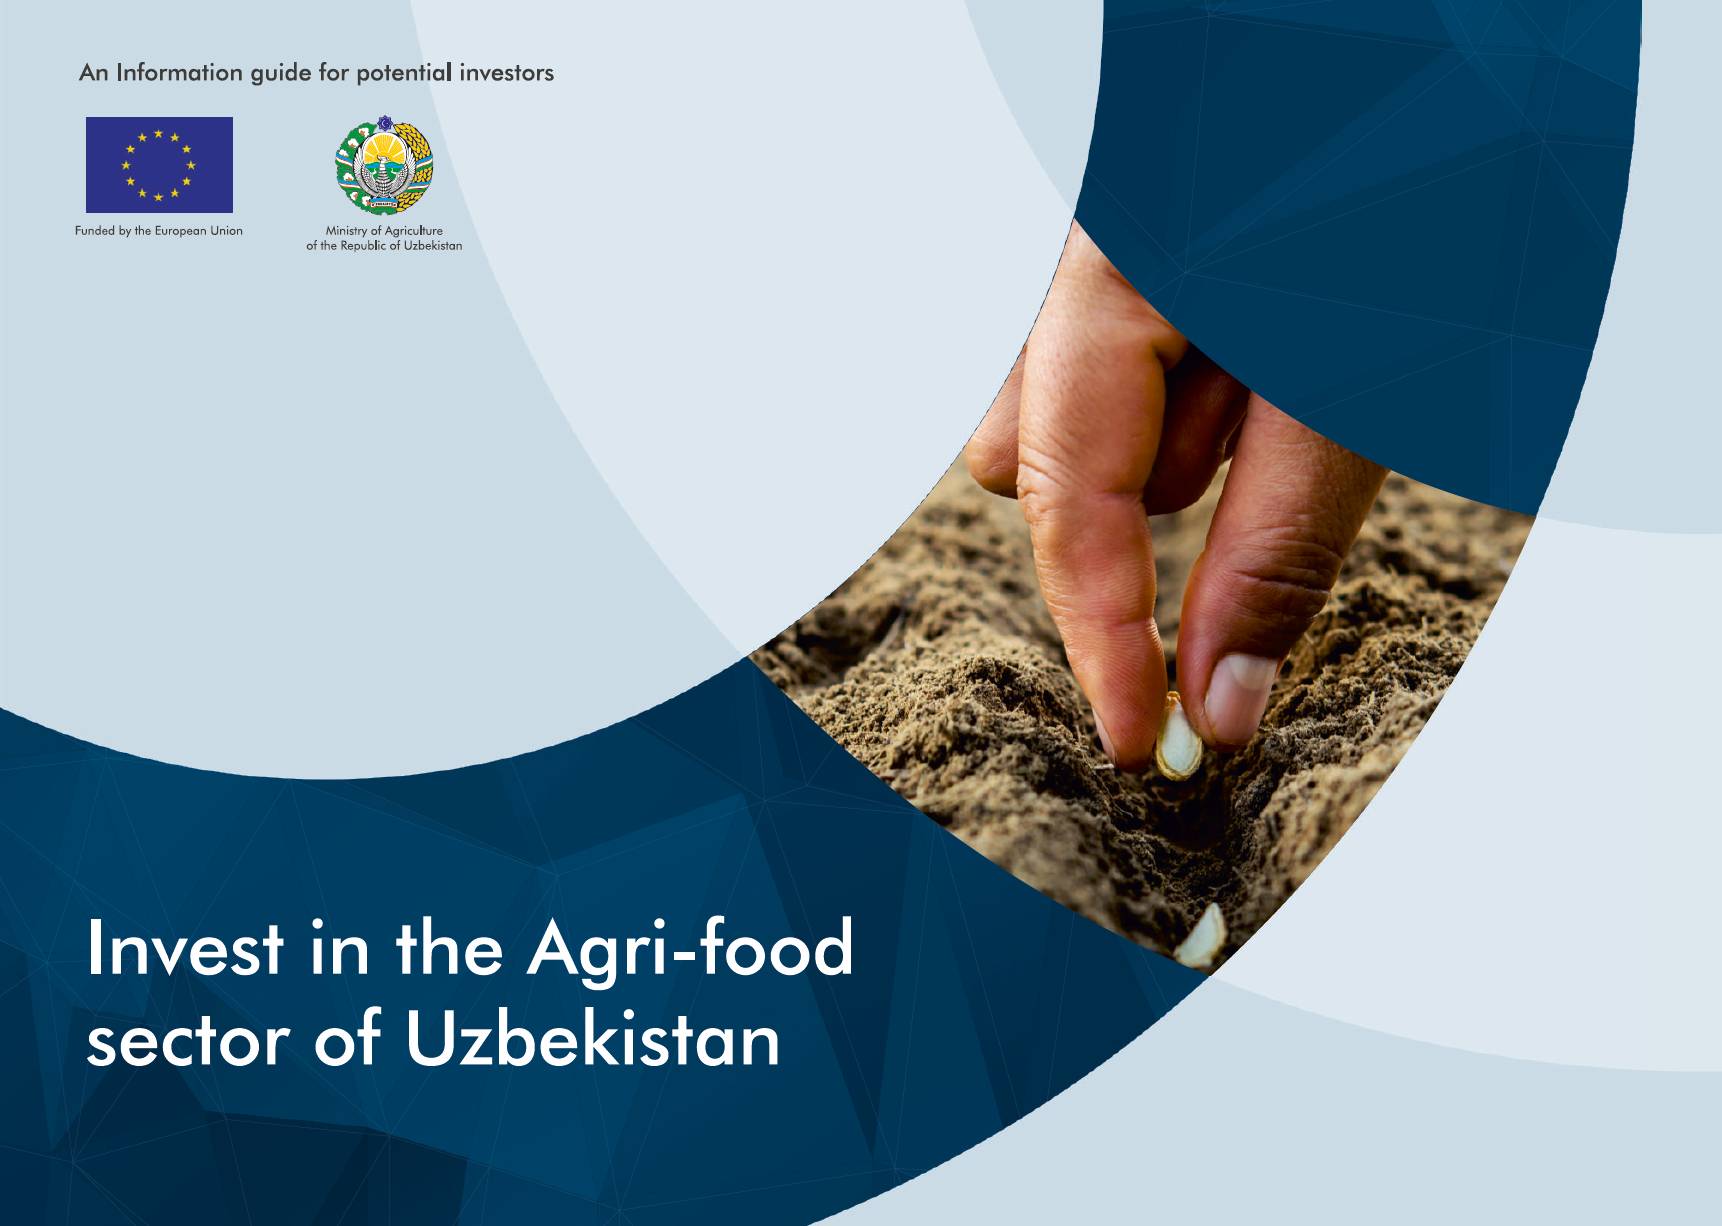 Why invest in the Agri-food sector of Uzbekistan